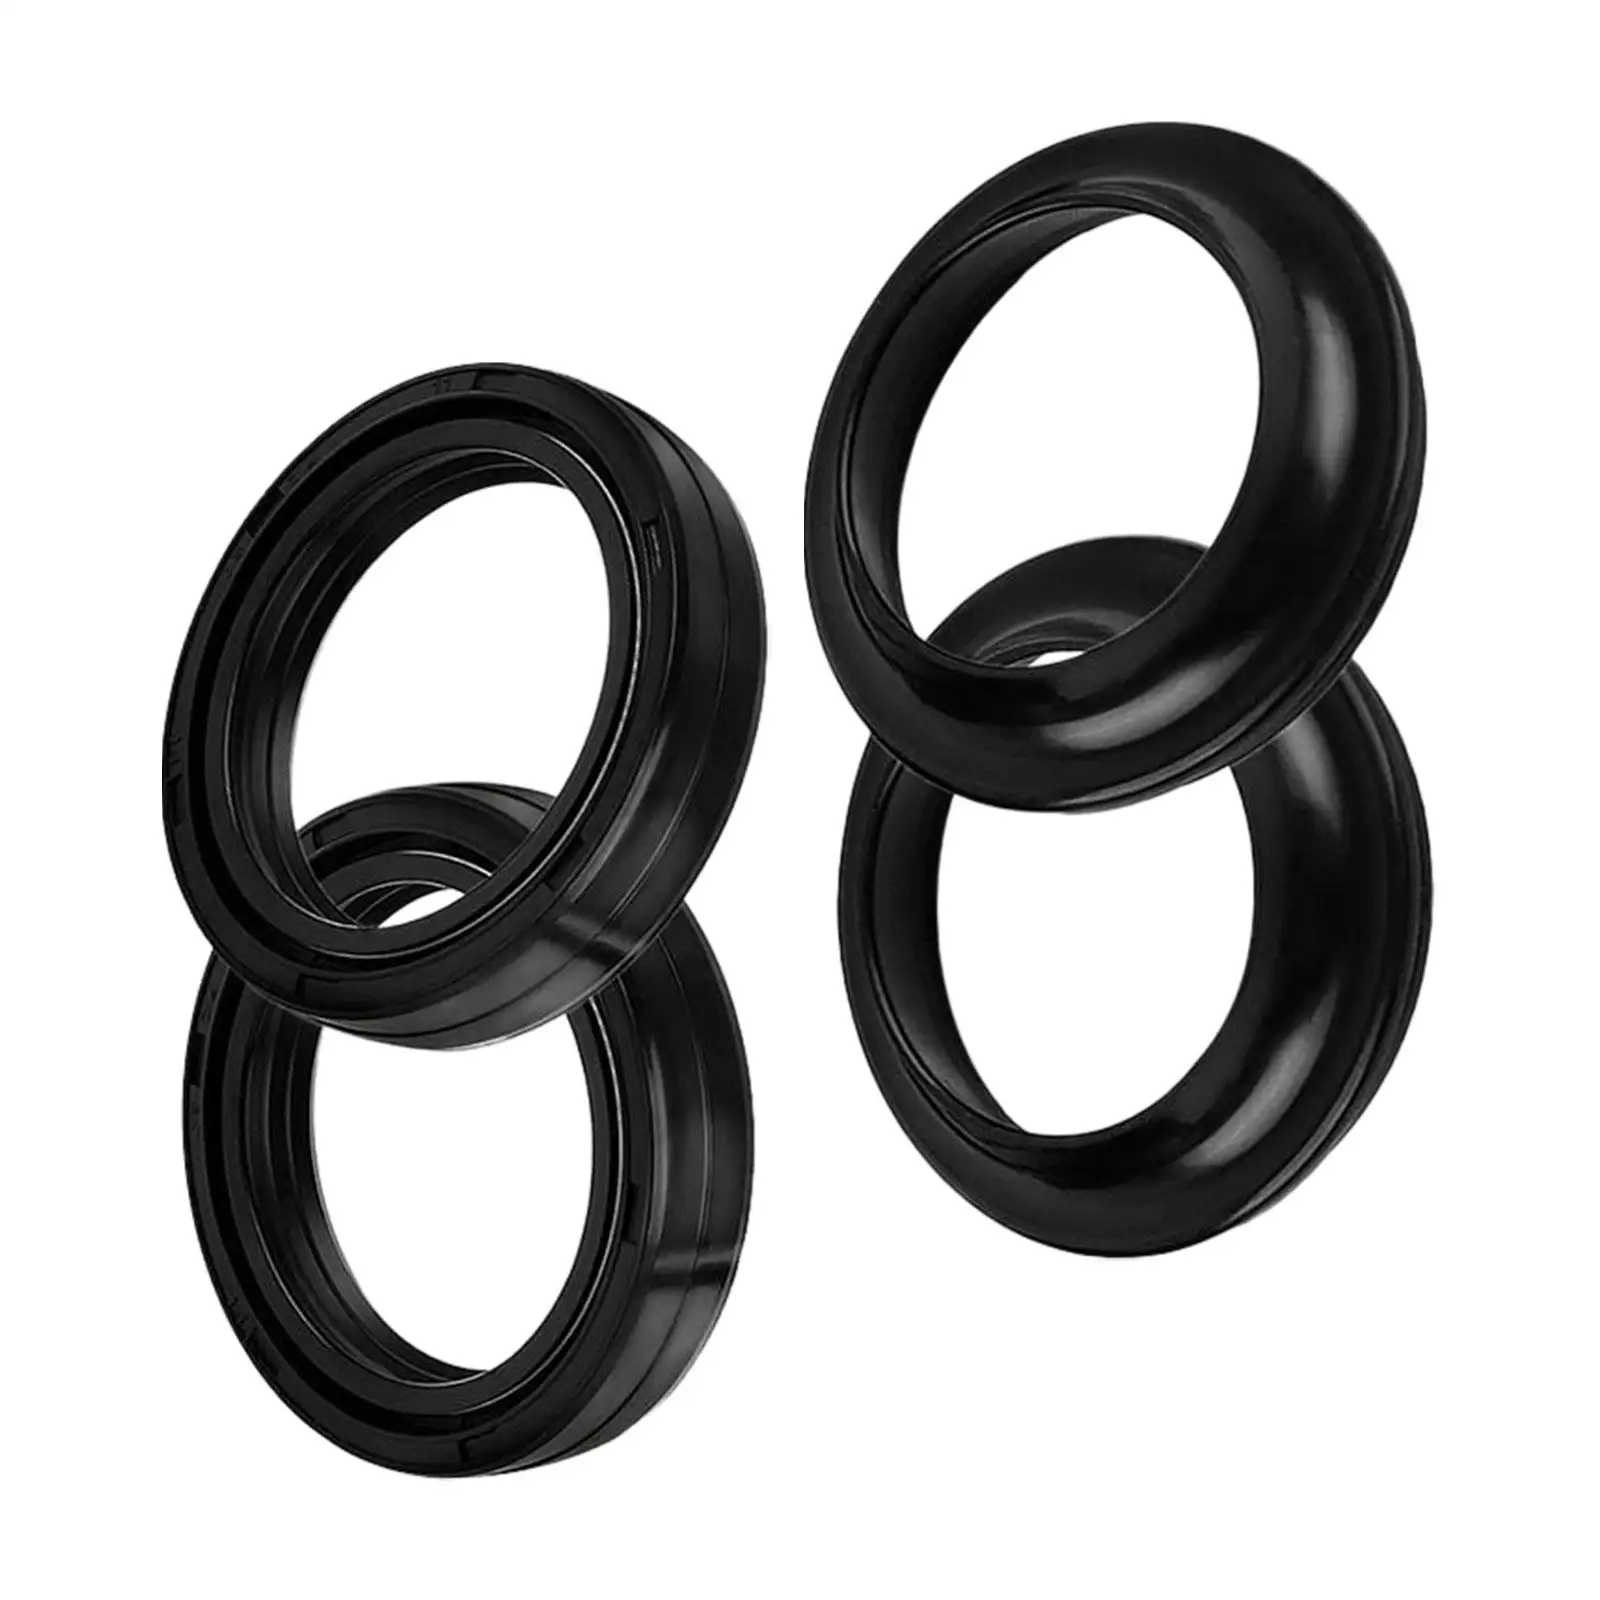 4 Pieces 39x52x11mm Rubber Front Fork Oil Seal & Dust Cover Oil Resistance for Harley XL883N XL1200 XL1200V XL1200N Xlh1100